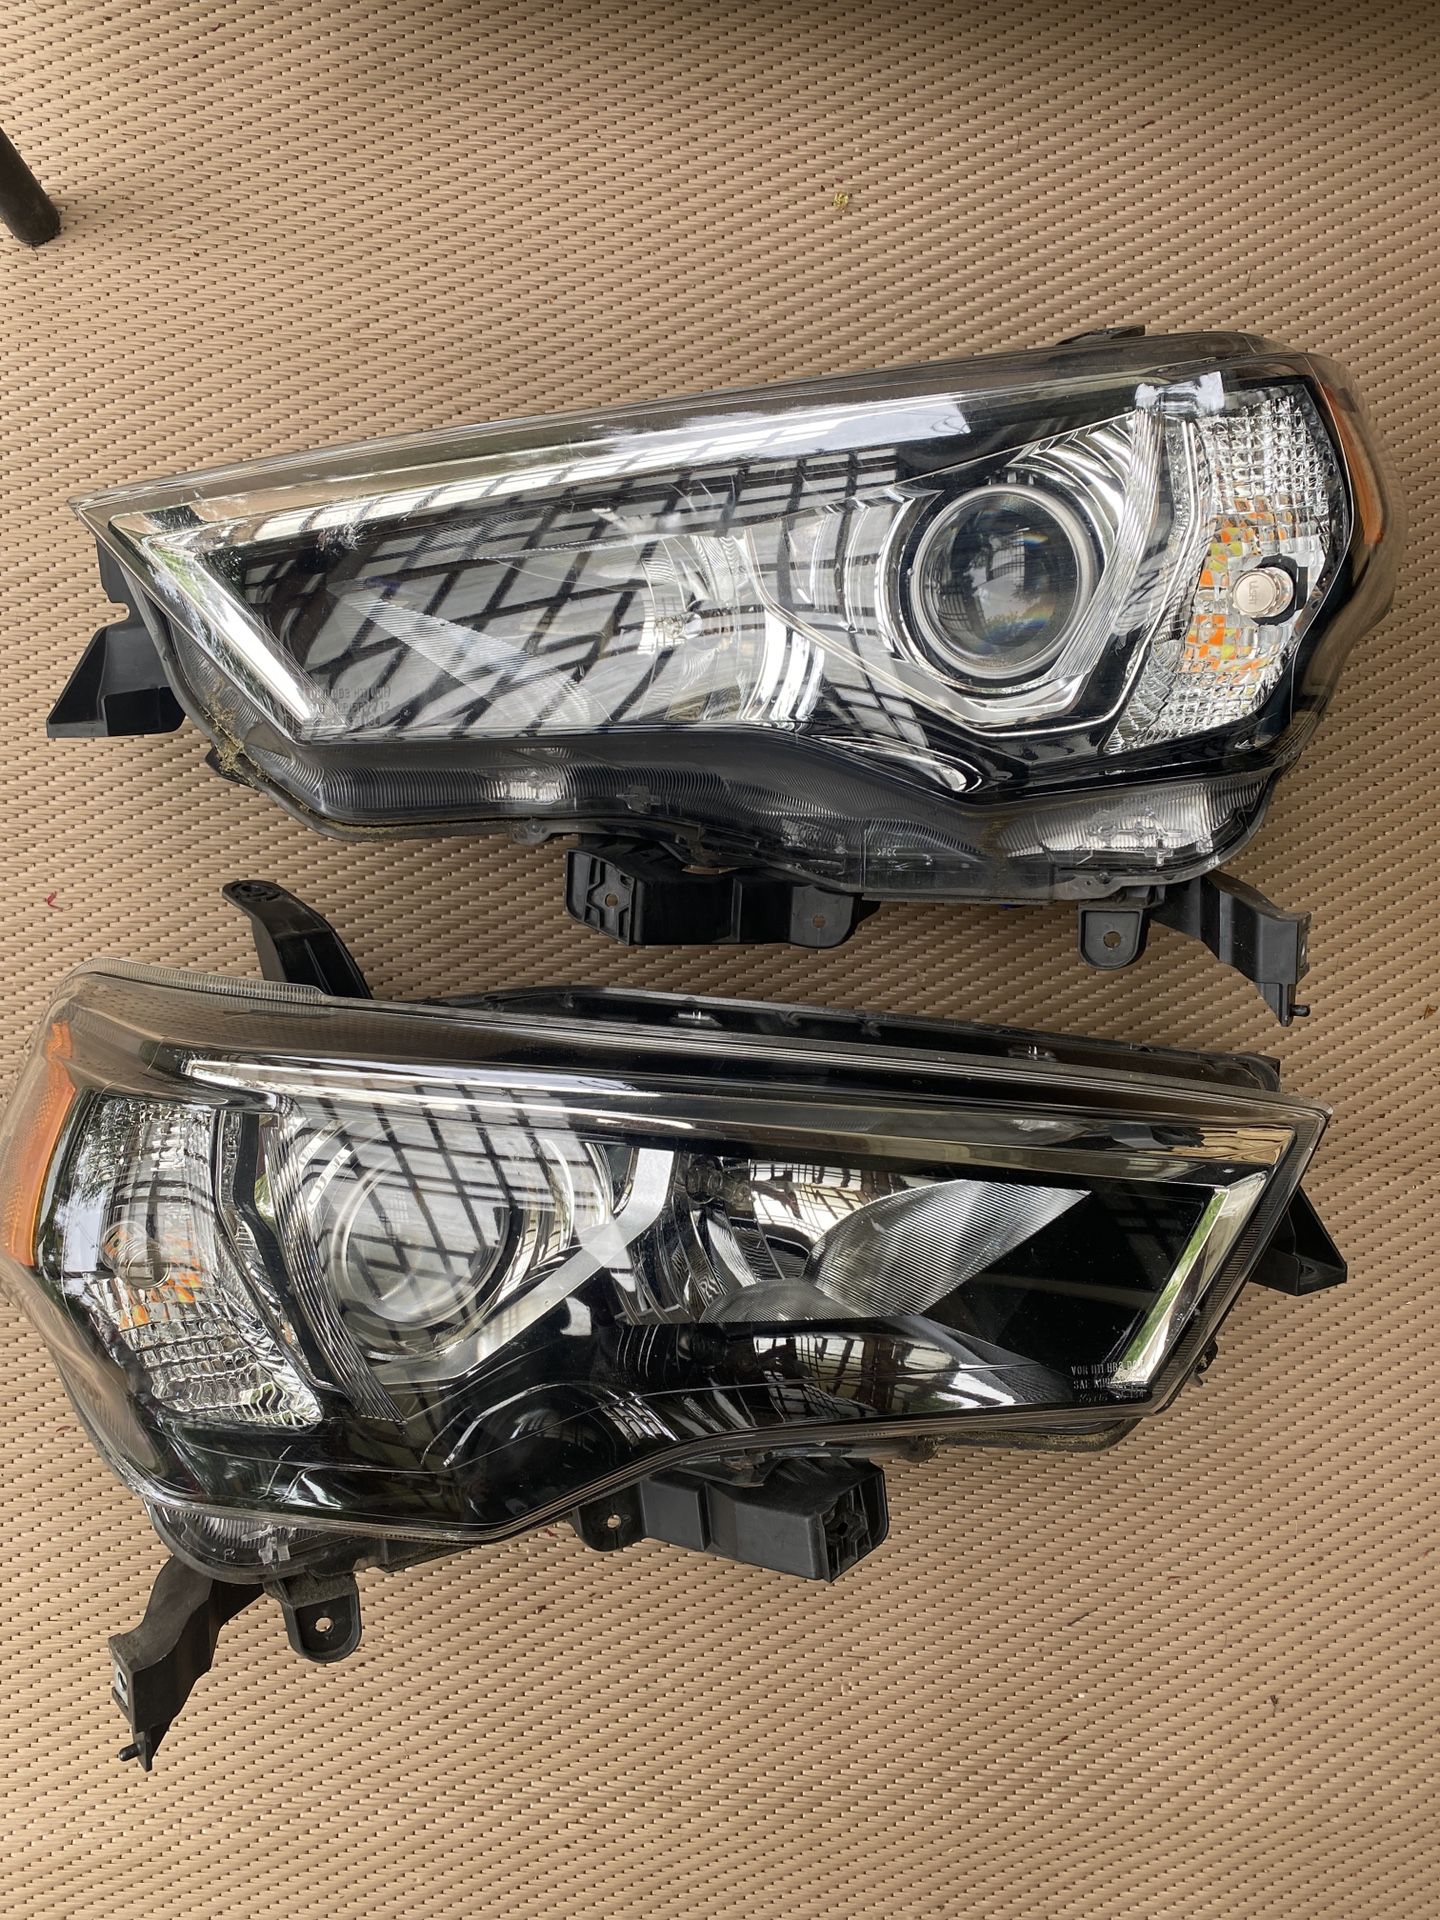 2014+ Toyota 4Runner Headlights W/ Aftermarket Low Beam And Blinker